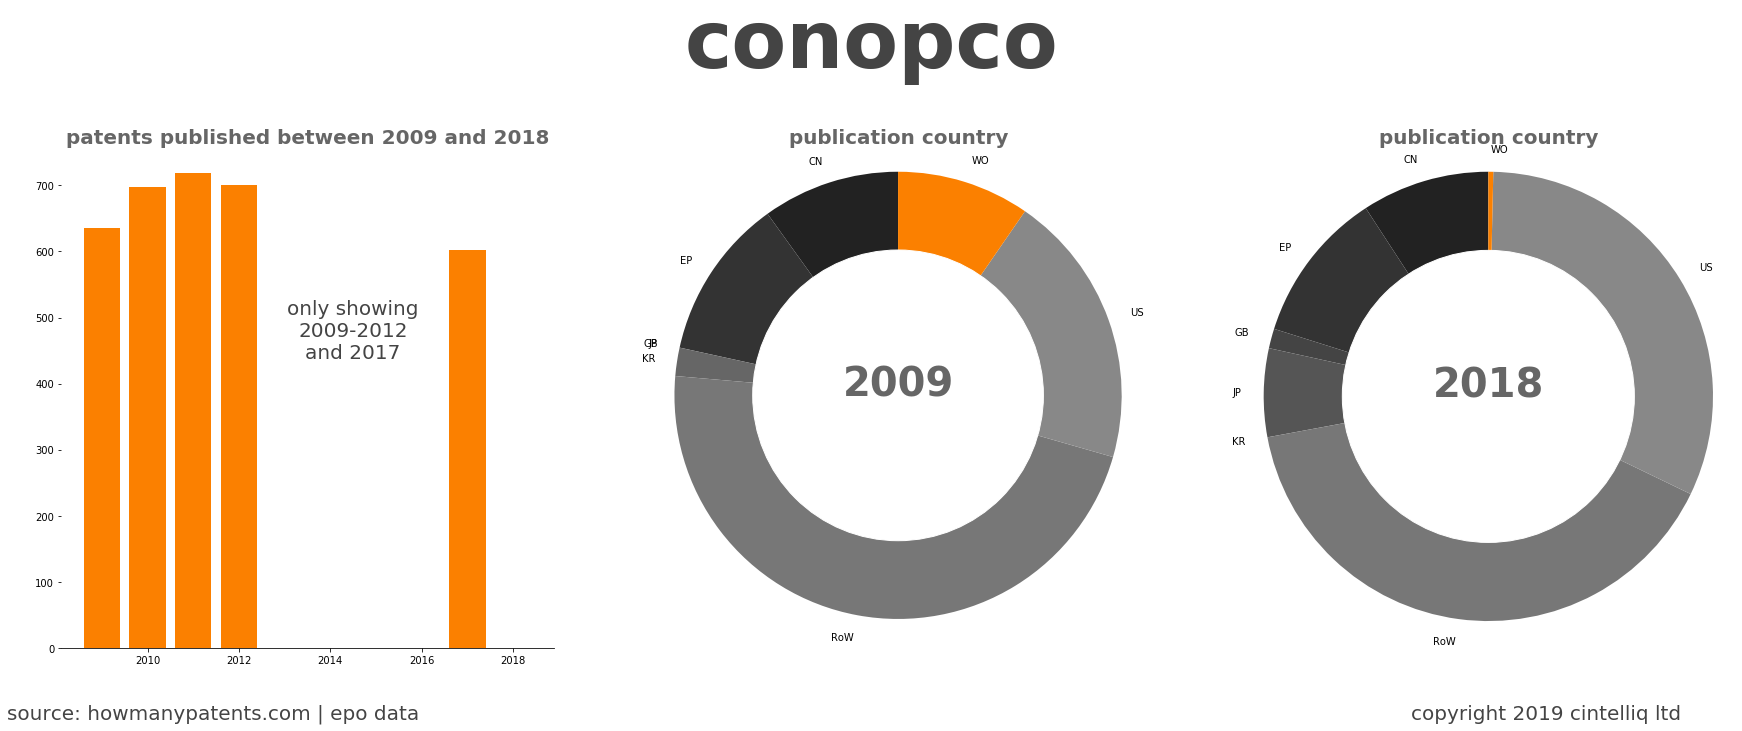 summary of patents for Conopco